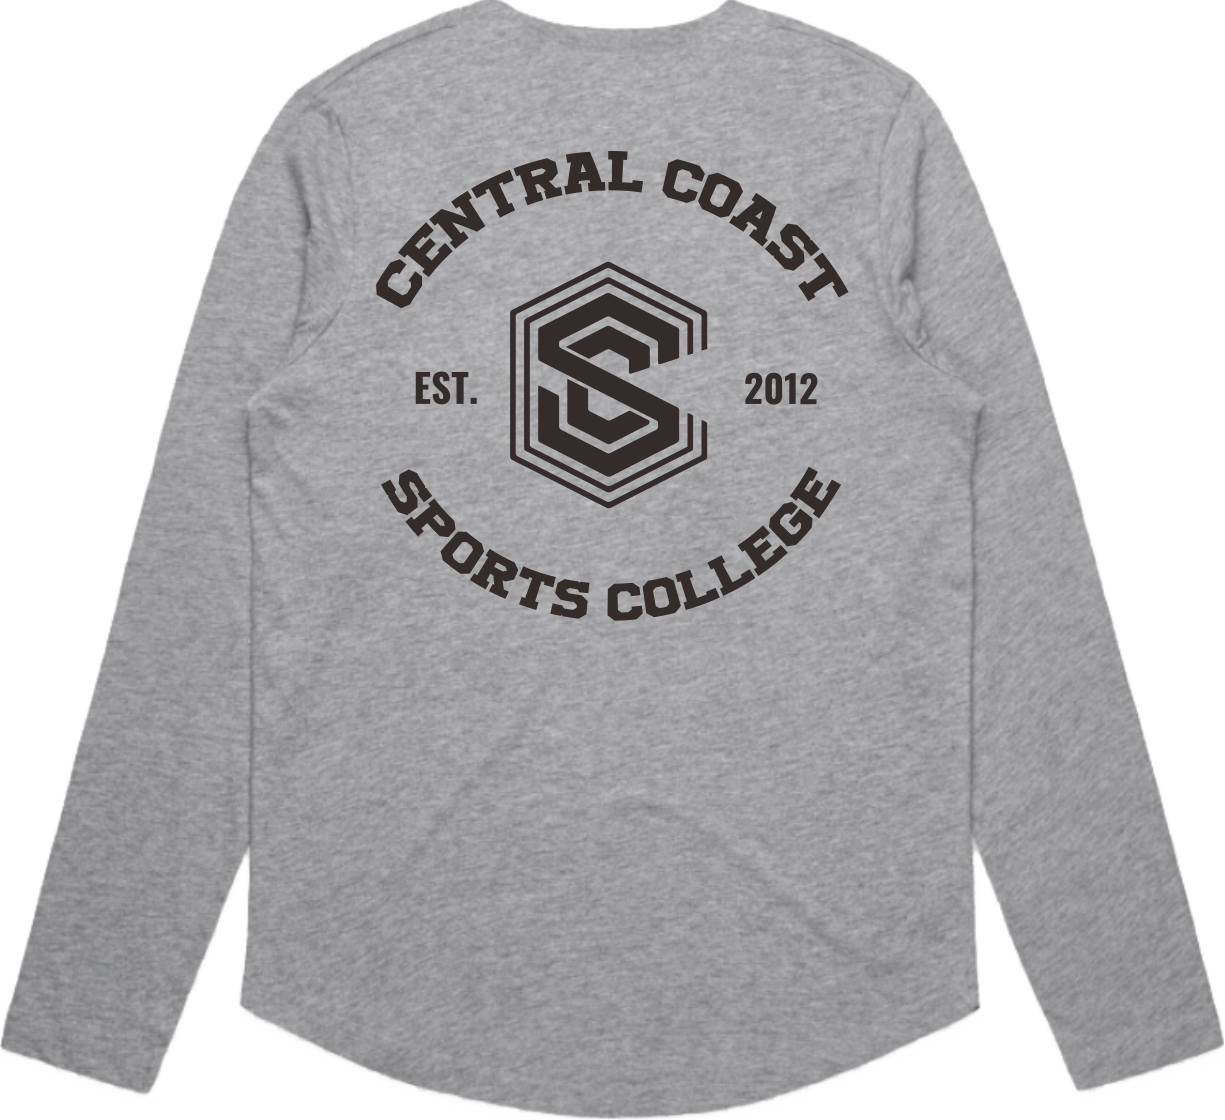 CCSC Varsity | Long Sleeve Cotton Tee with Large Print